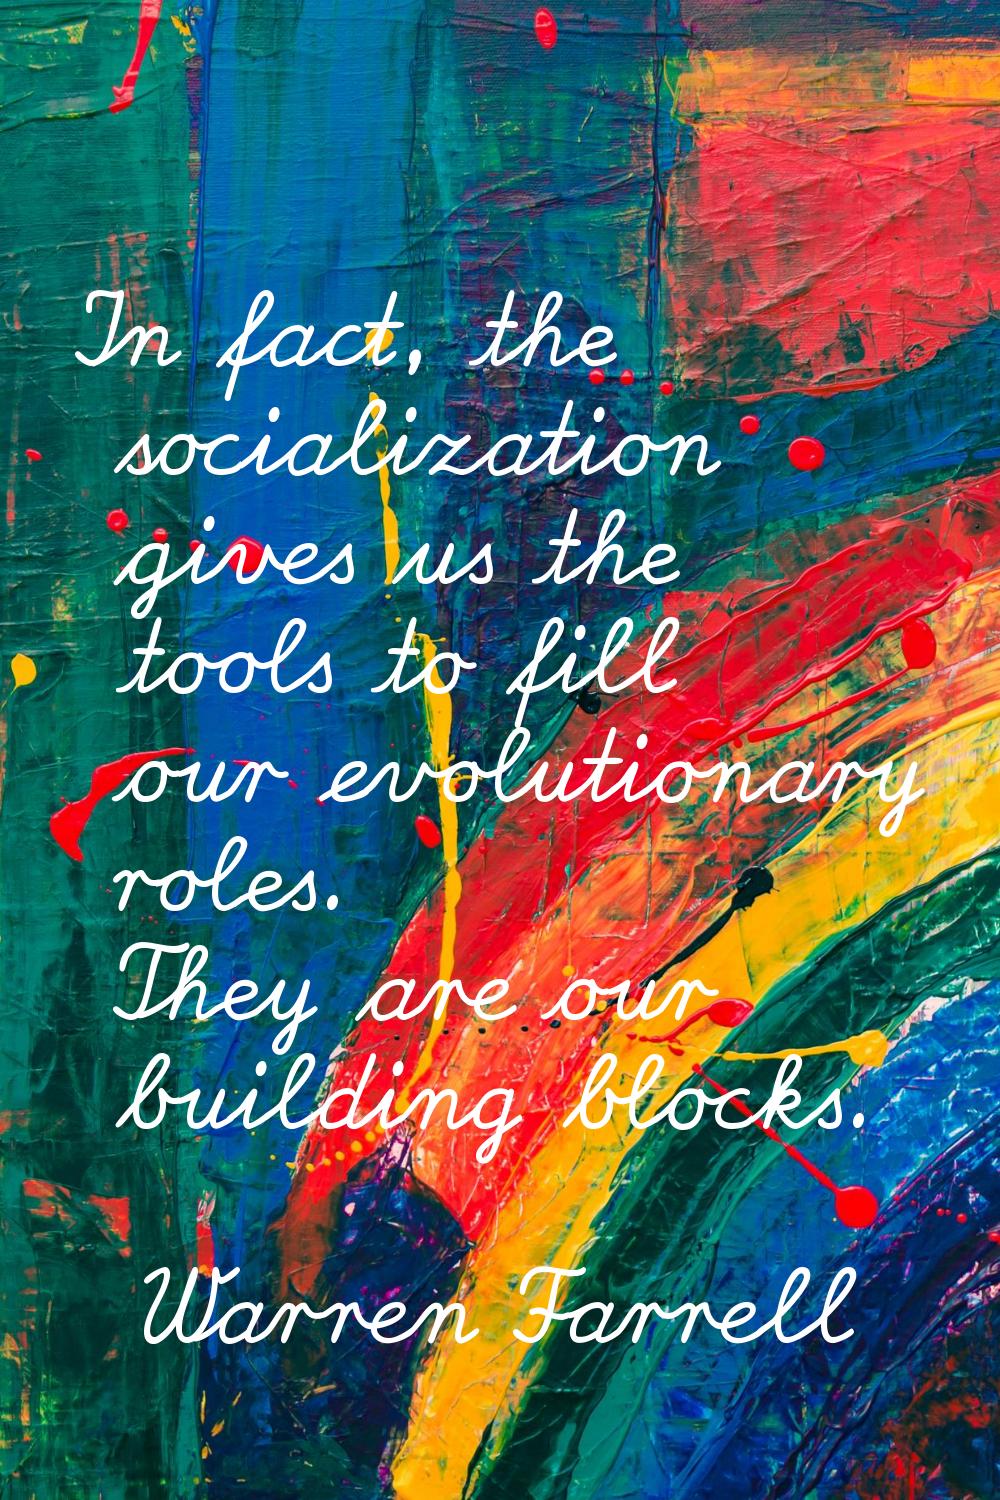 In fact, the socialization gives us the tools to fill our evolutionary roles. They are our building